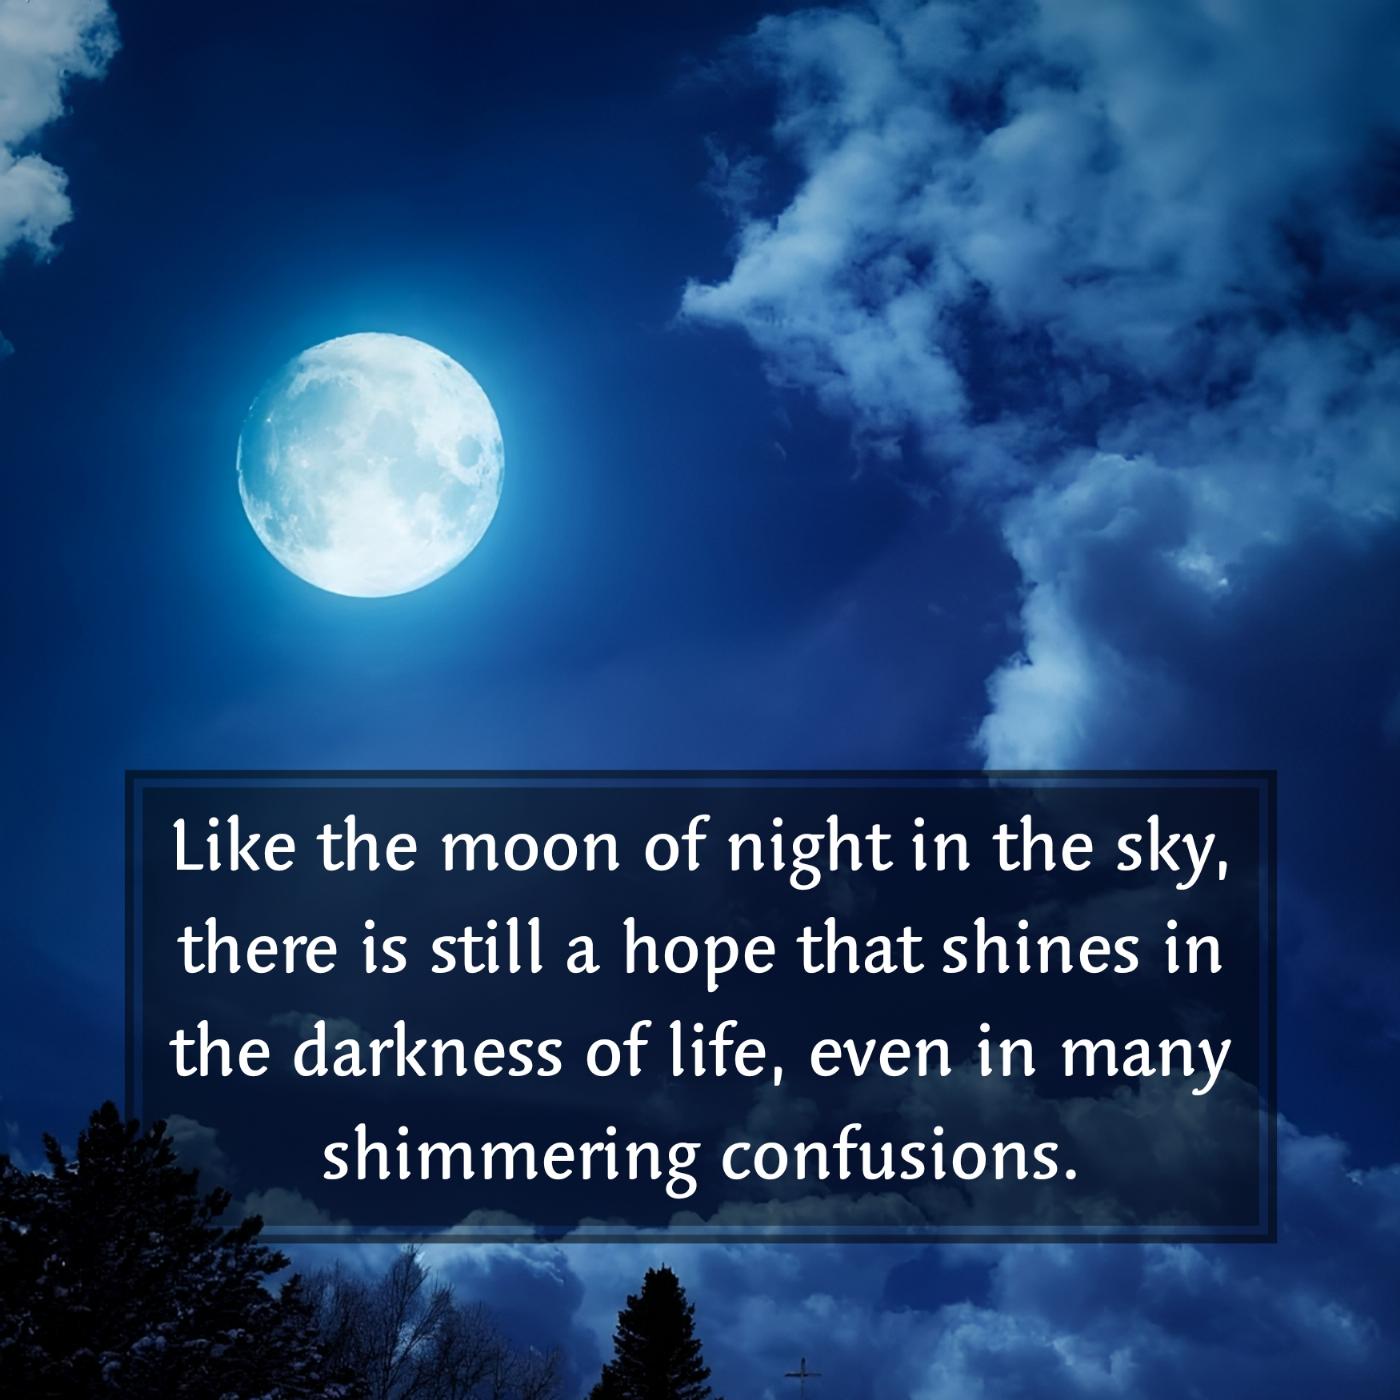 Like the moon of night in the sky there is still a hope